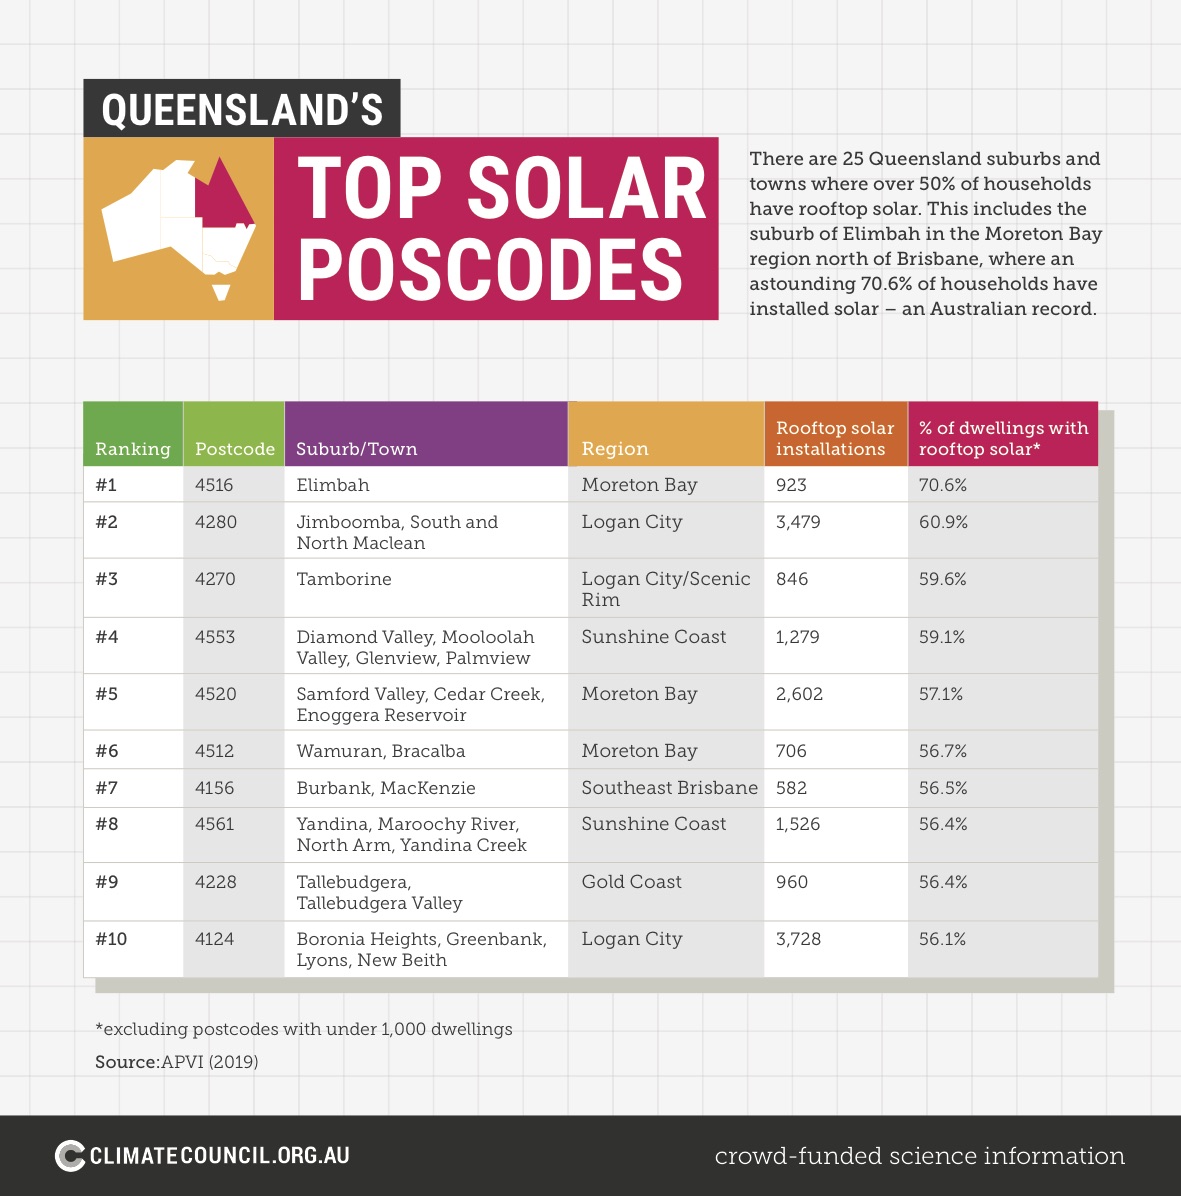 A table consisting of the top solar postcodes in Queensland